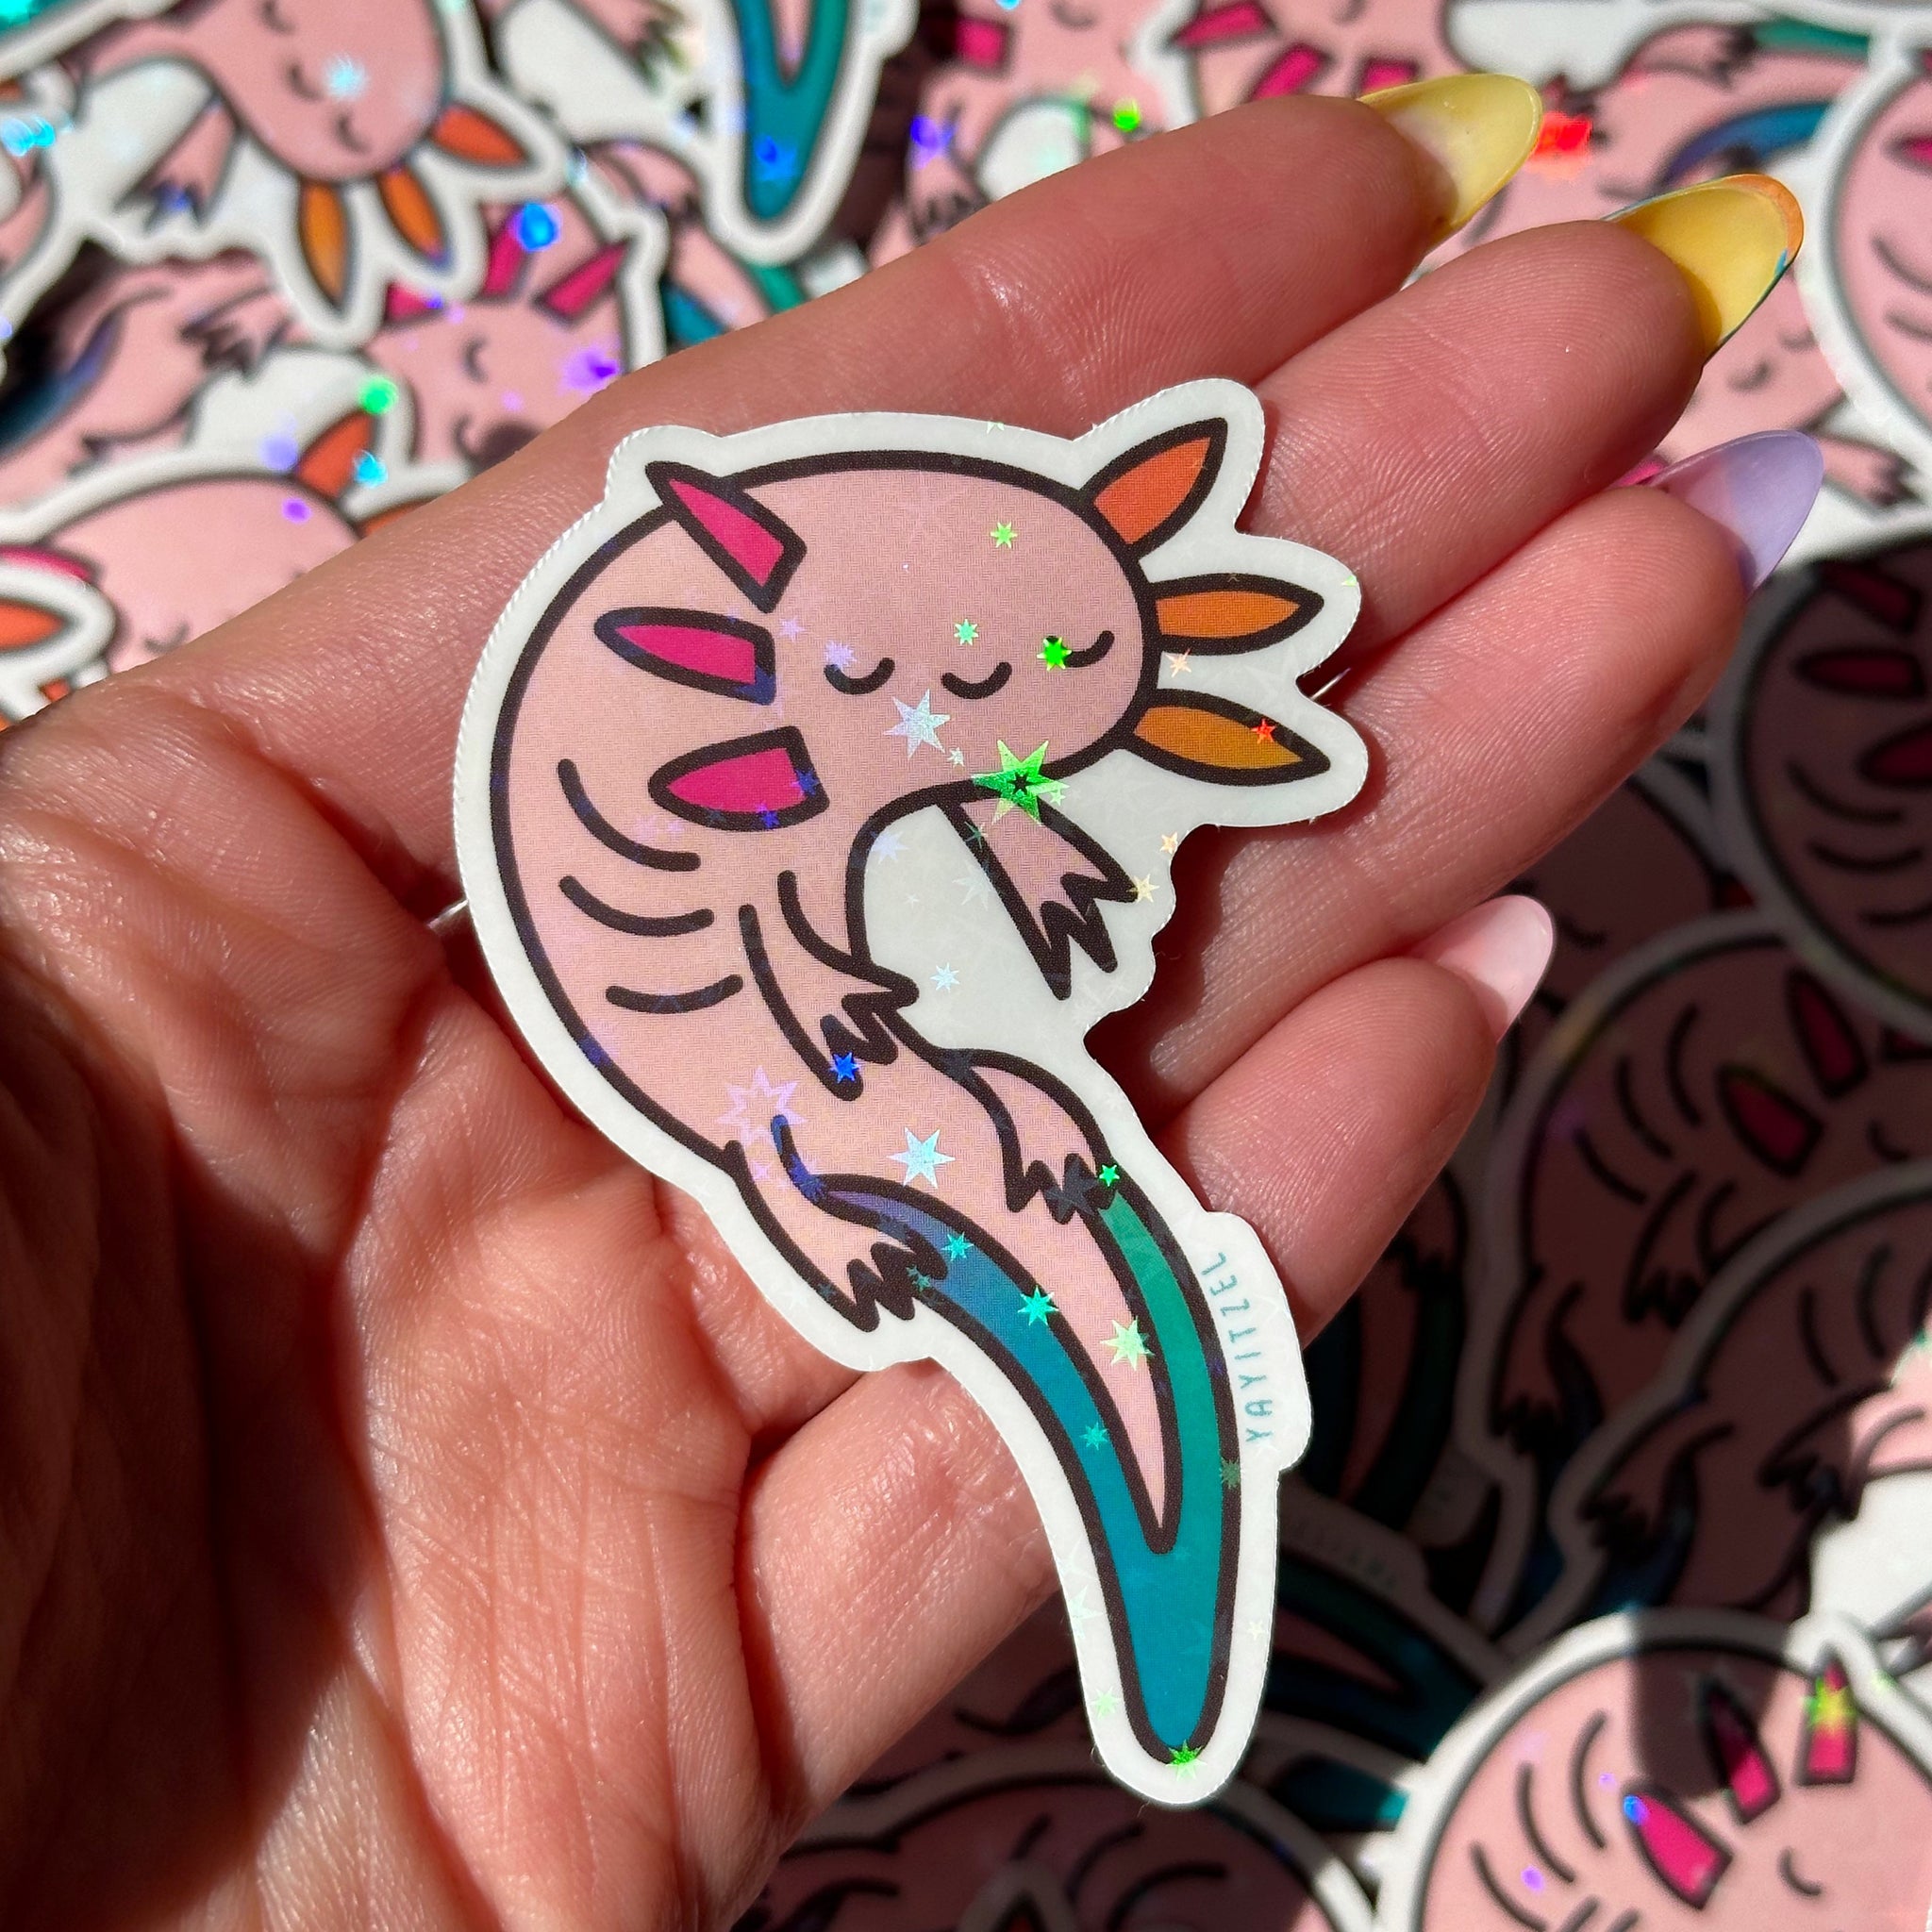 holding one colorful axolotl holographic sticker. it has holographic foil that sparkles in the shape of stars